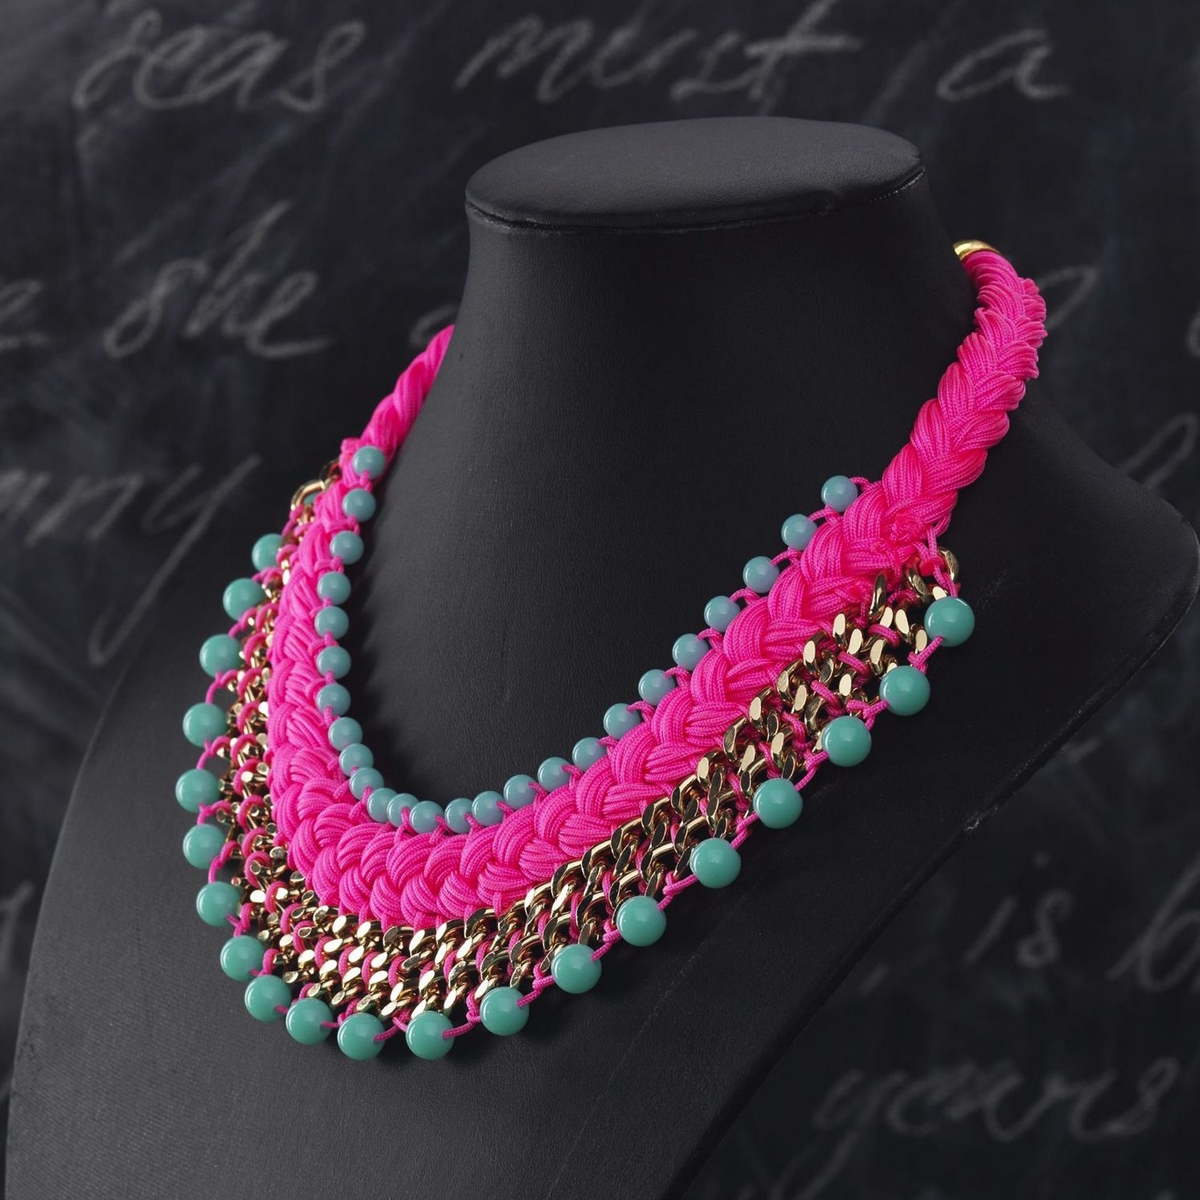 Big and stunning necklaces